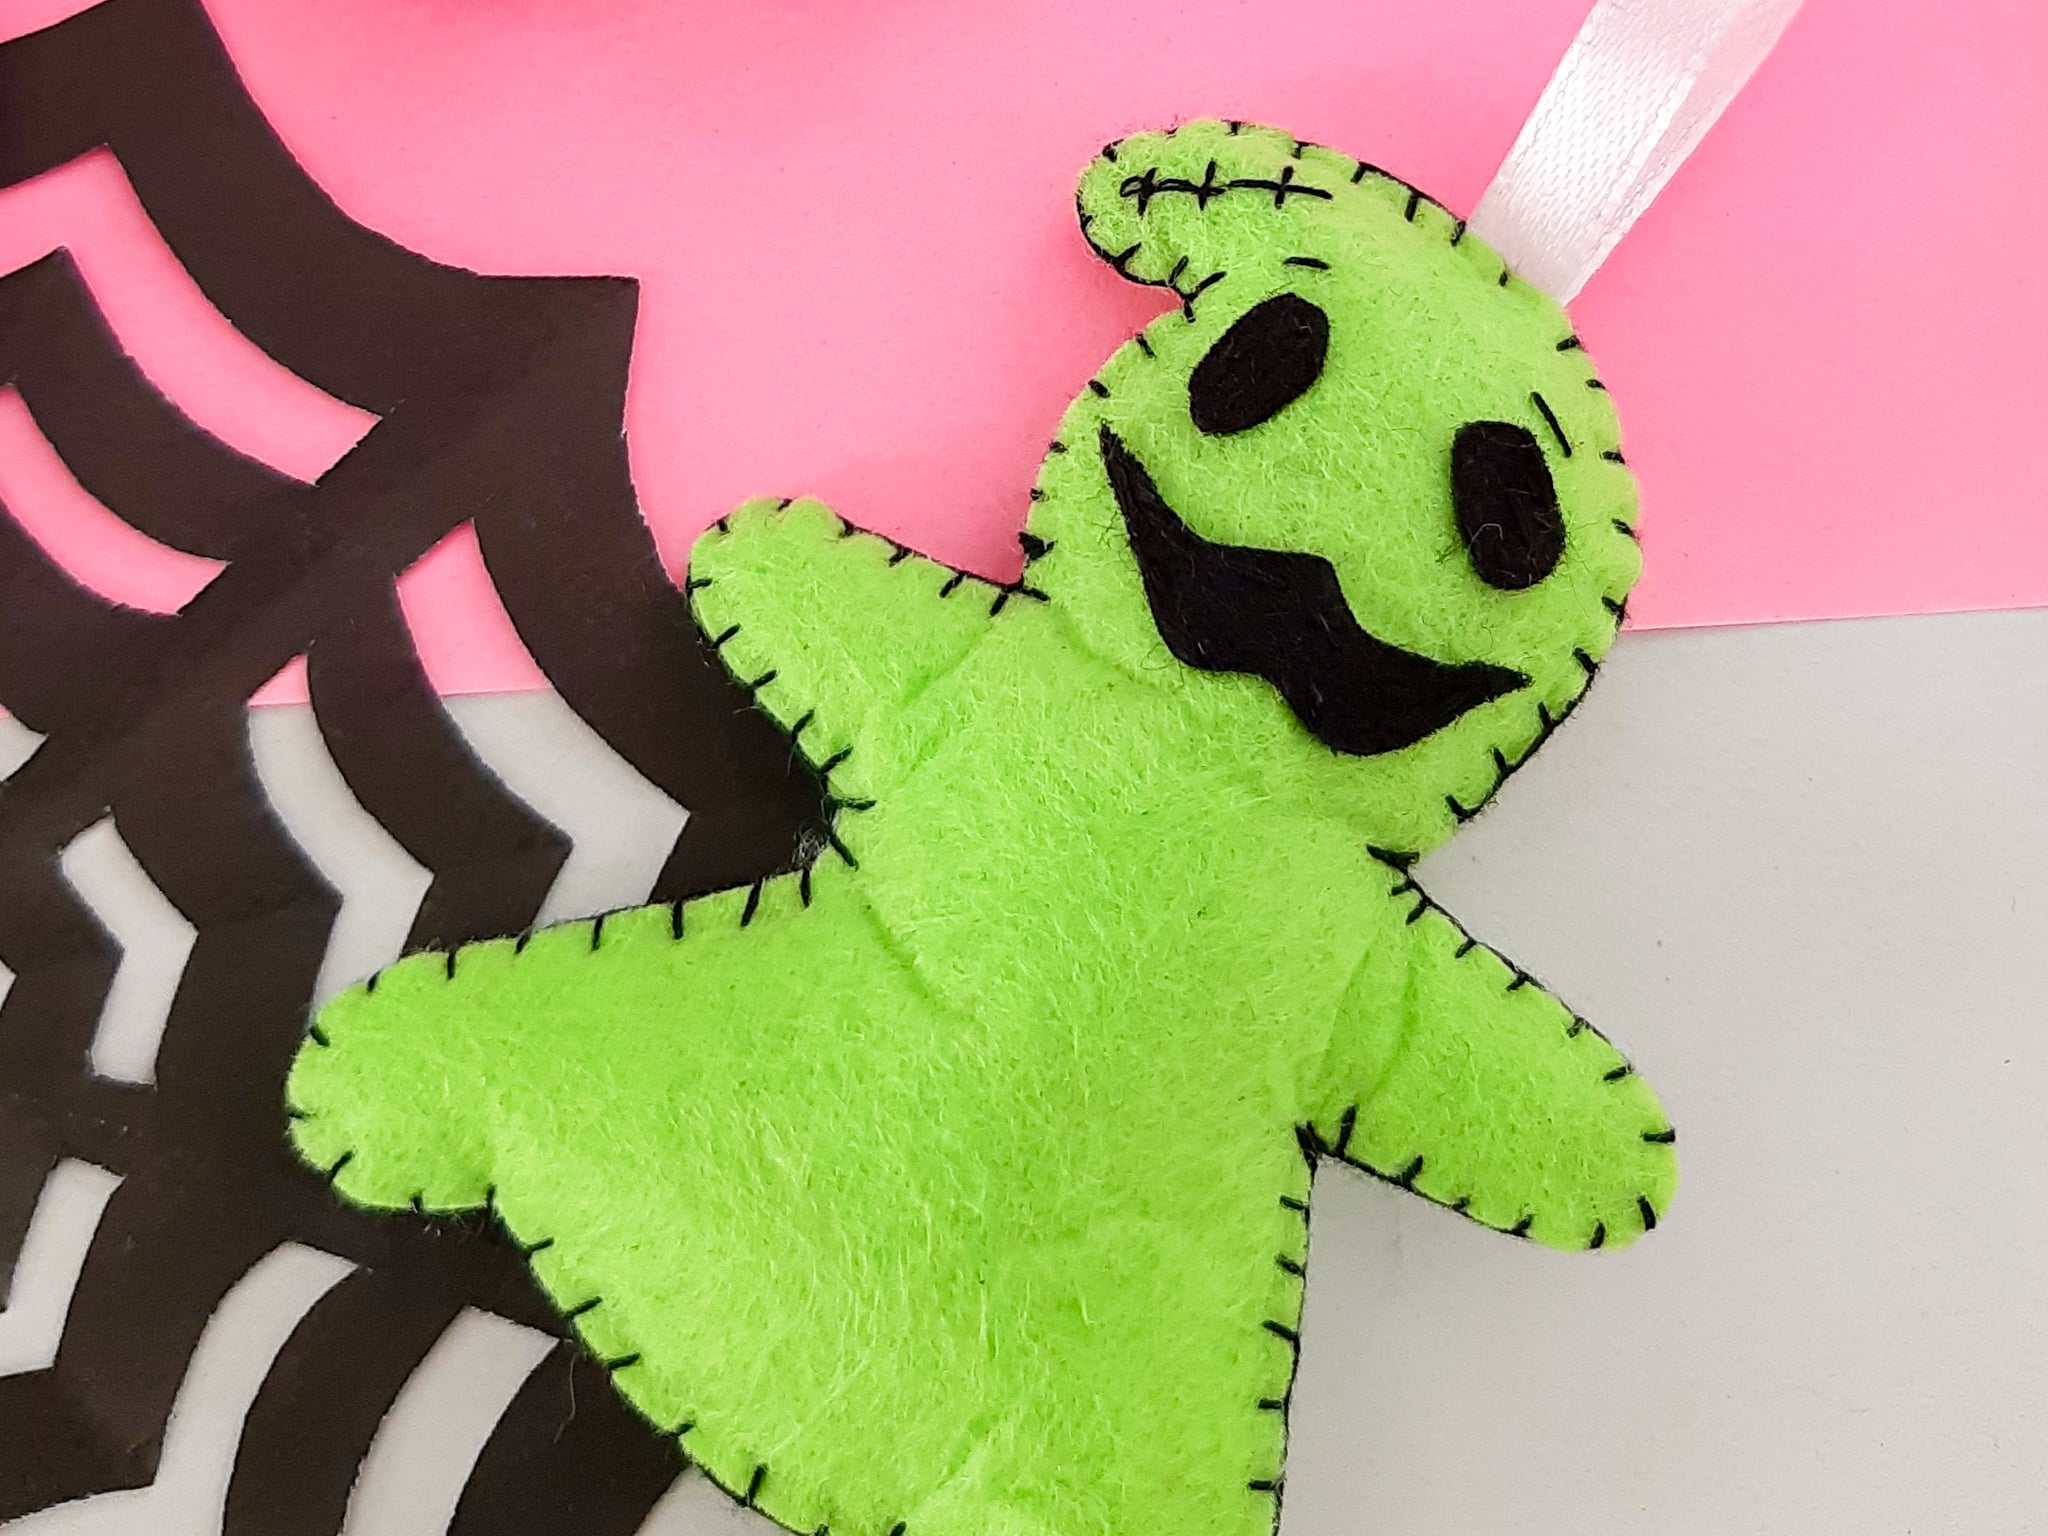 A green ghost stuffed animal on a pink background.